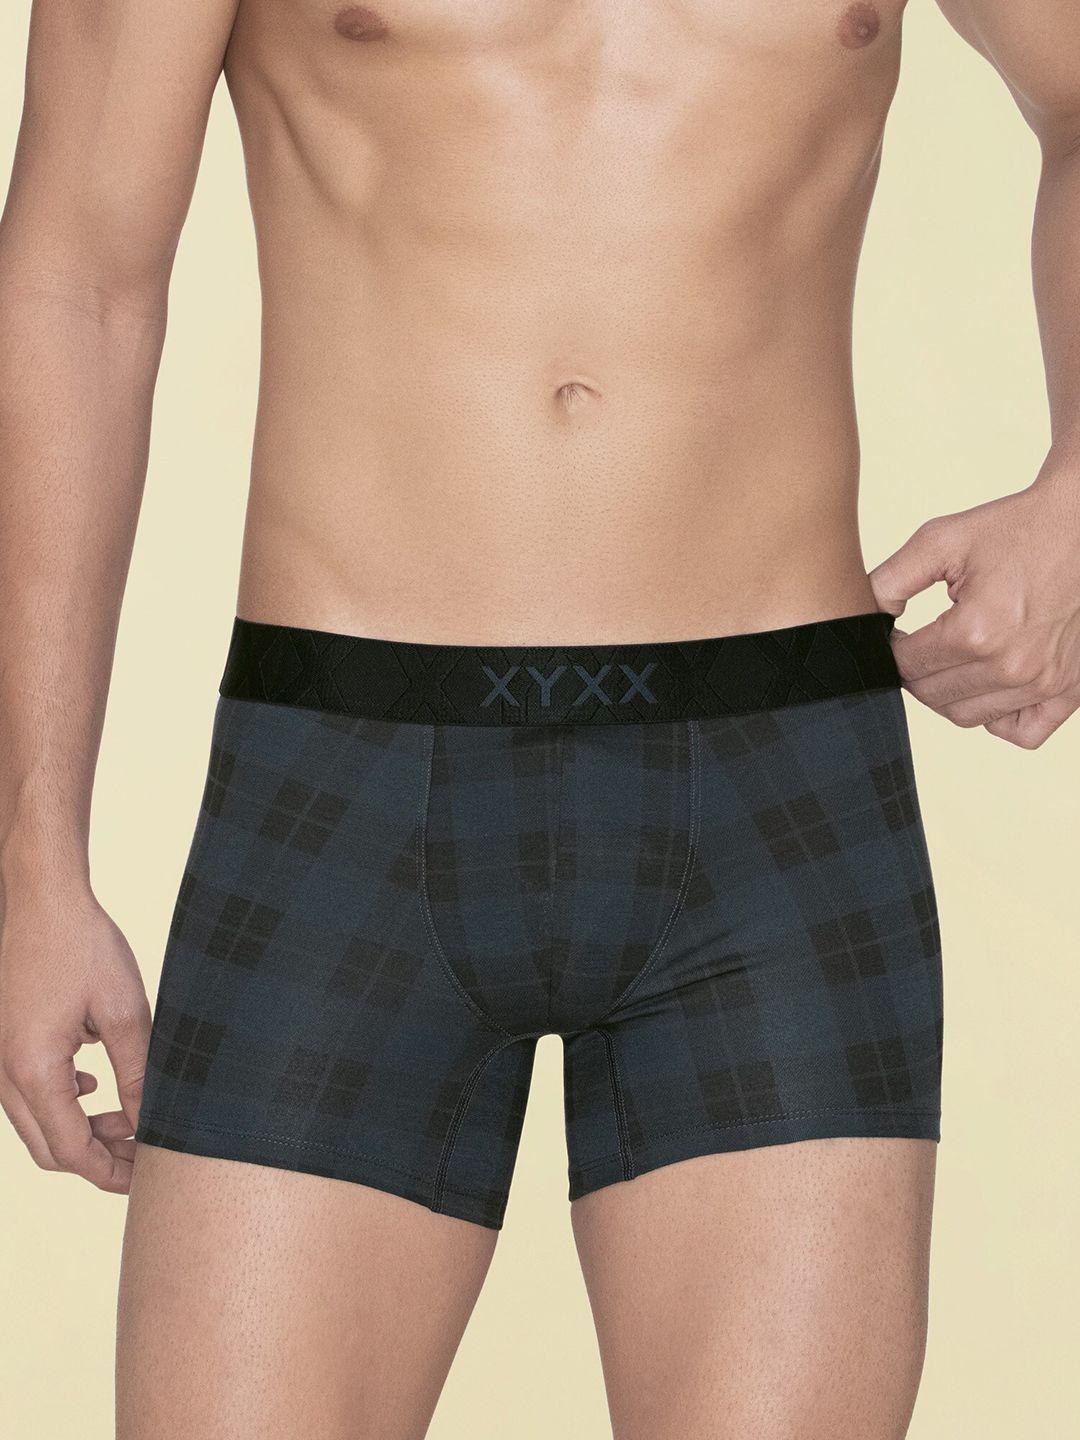 xyxx men checked breathable trunk xytrnk179